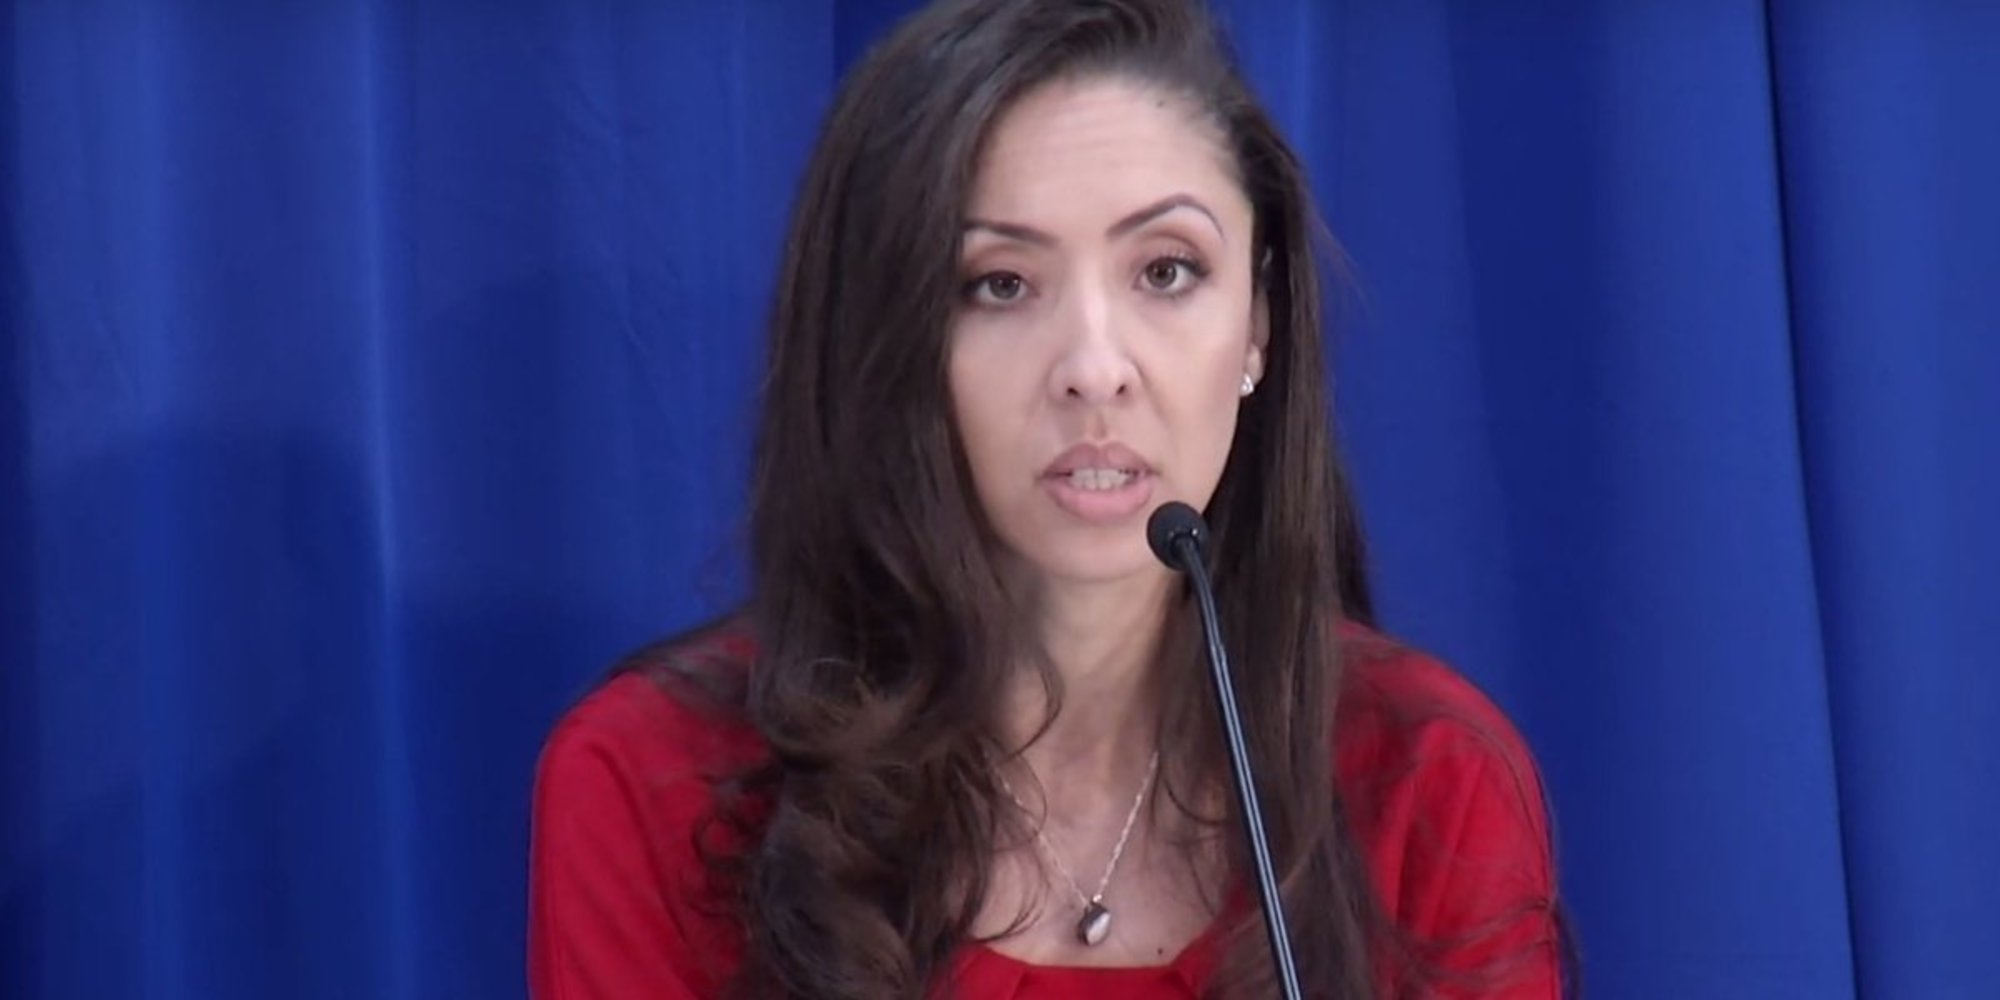 Denver Council Member Candi CdeBaca Promises To Impose Communism ‘By Any Means Necessary’